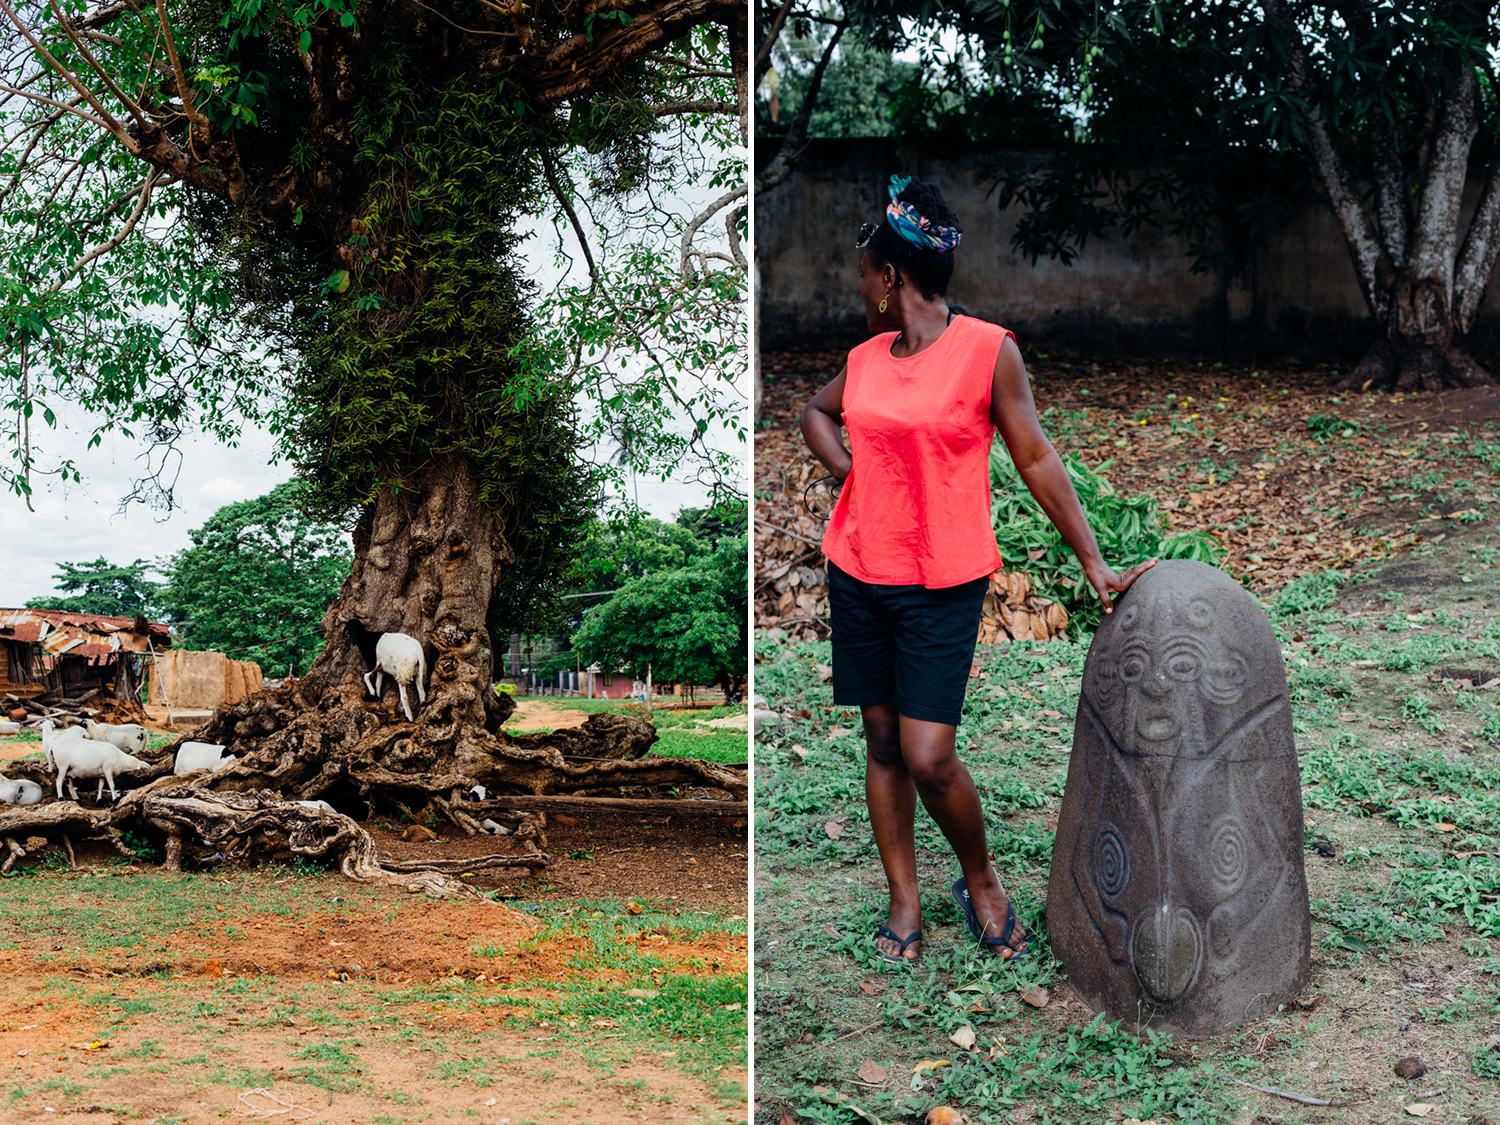 Allegedly the Oldest Tree in West Africa, Alok-Ikom